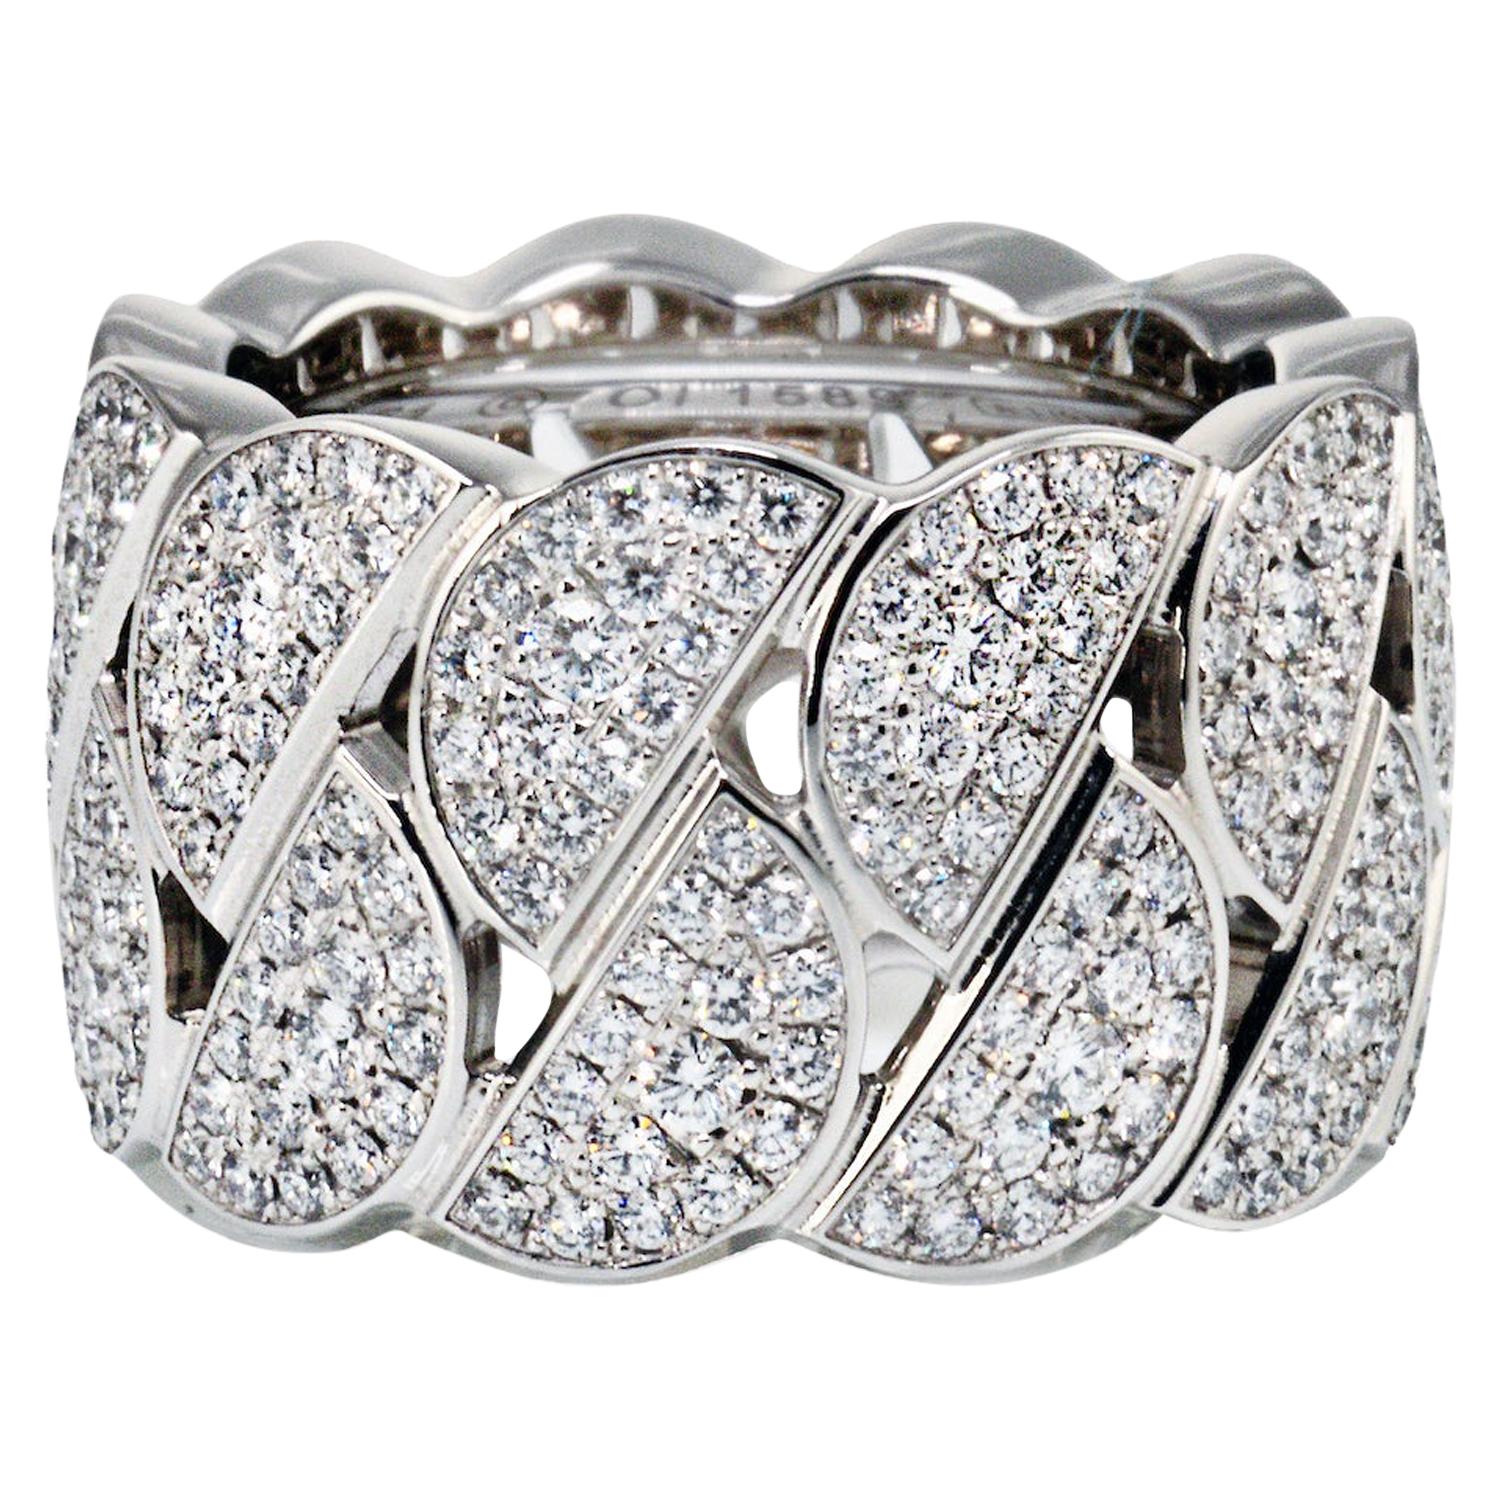 Ladies Cartier 18kt white gold and diamond #La Dona# wide ring comprised of a double row of half-moon shaped links that are all set with pavé round brilliant cut diamonds. Size EU 51.

With a copy of the original receipt.

Width: 13.5mm

Hallmarked: